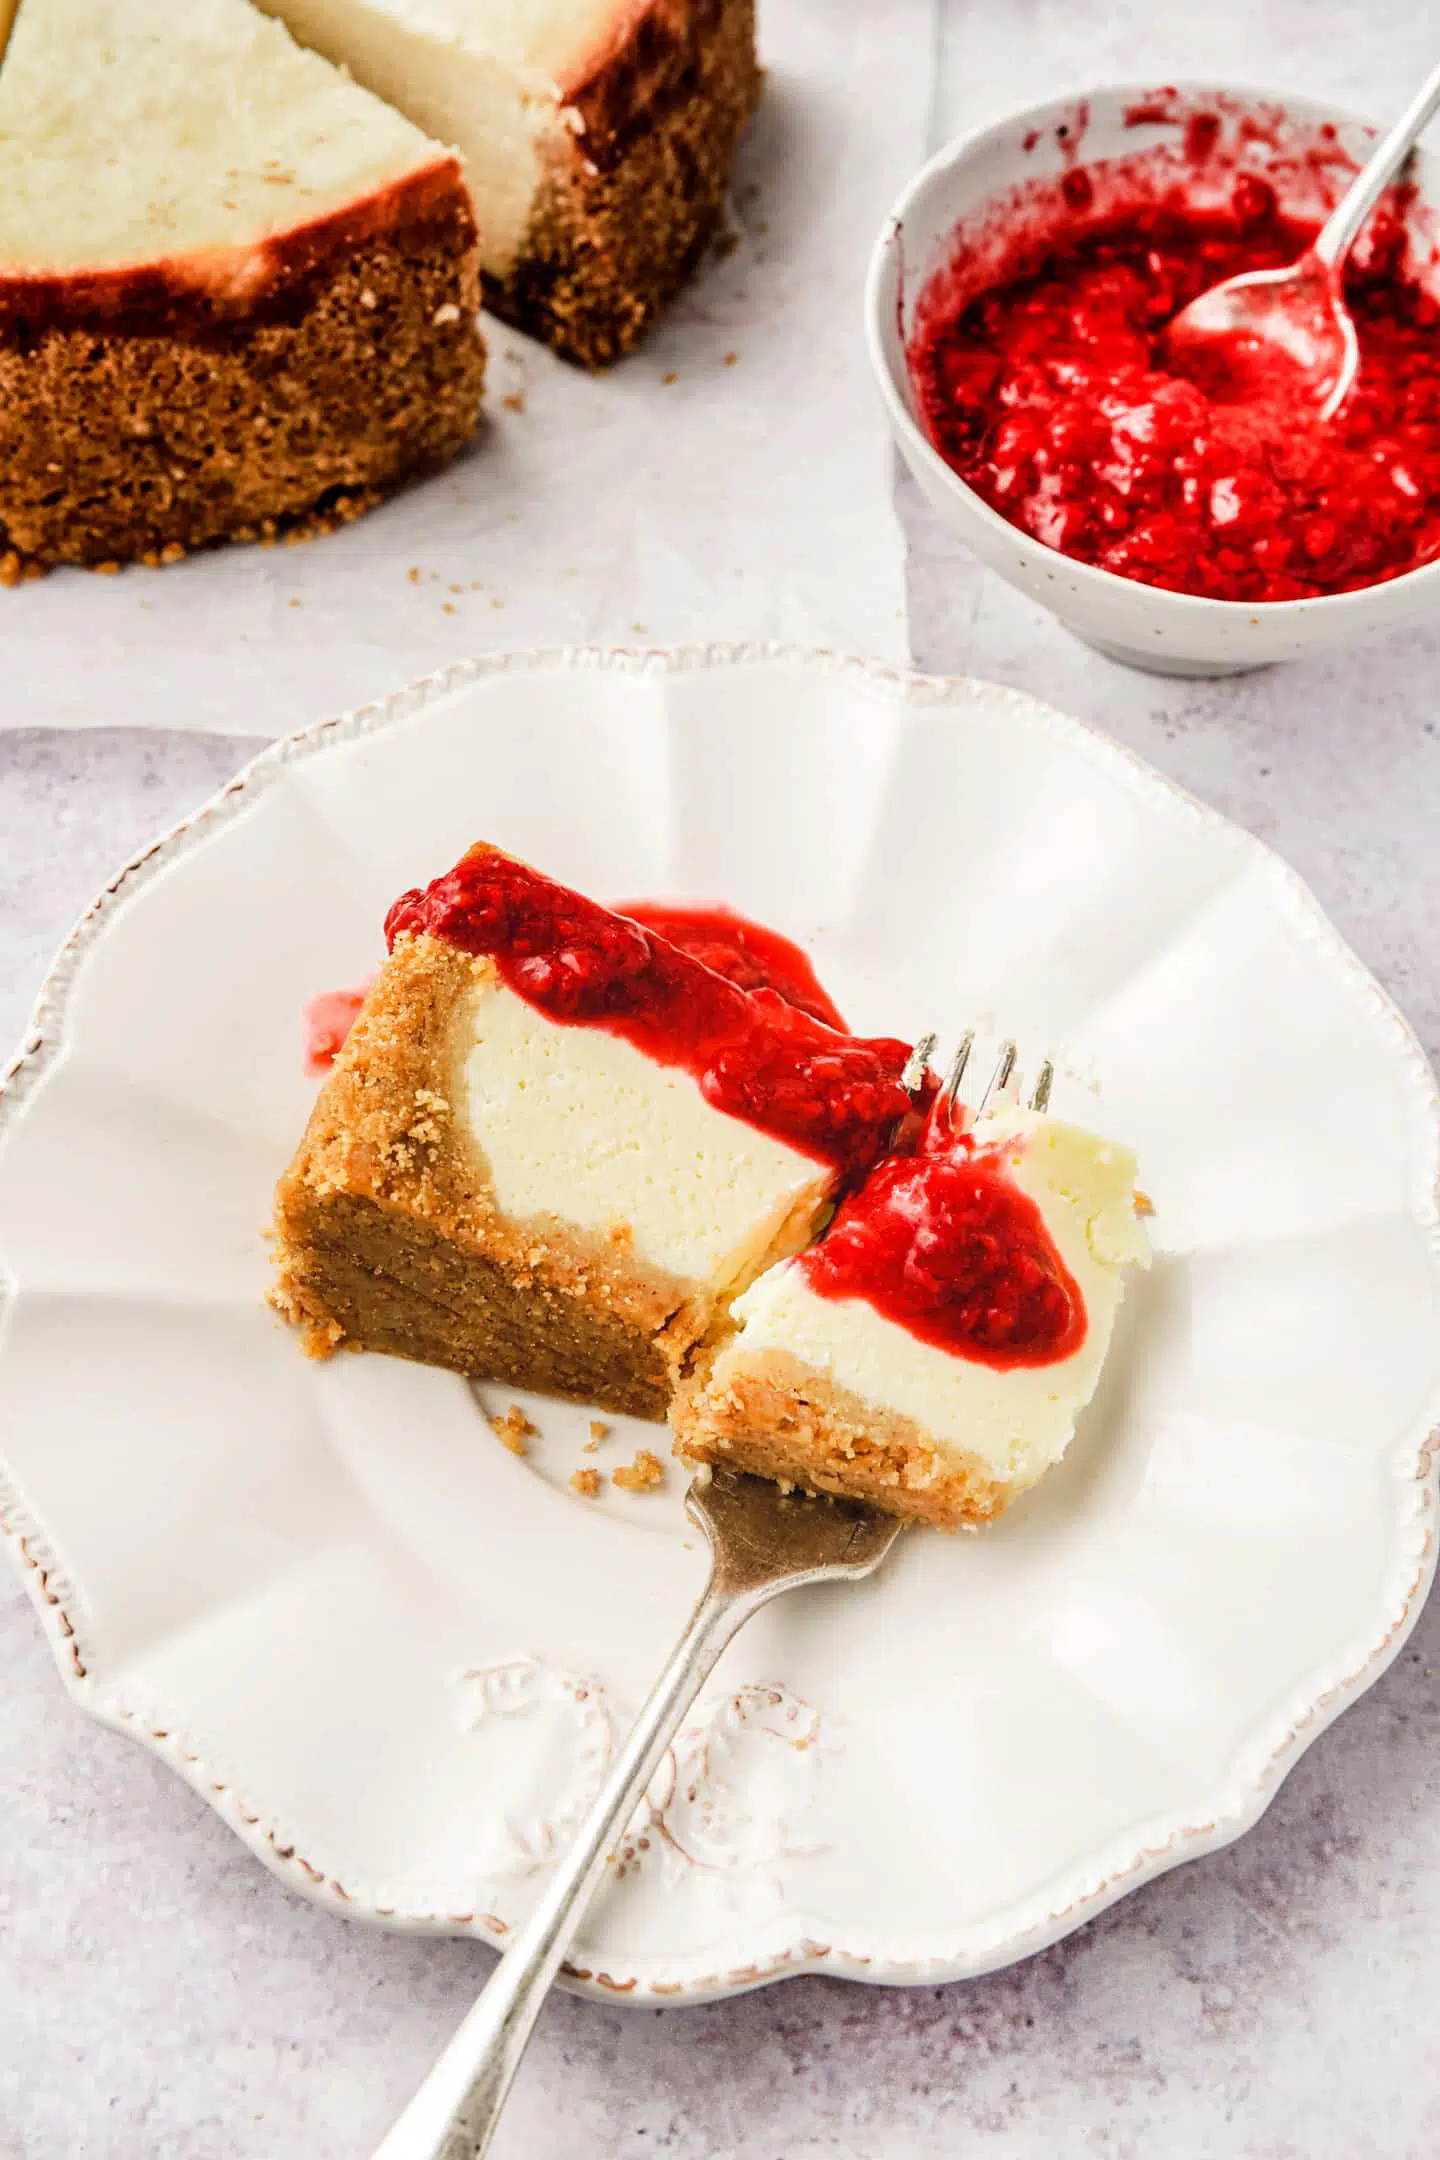 New york style cheesecake recipe in a plate cut by a fork